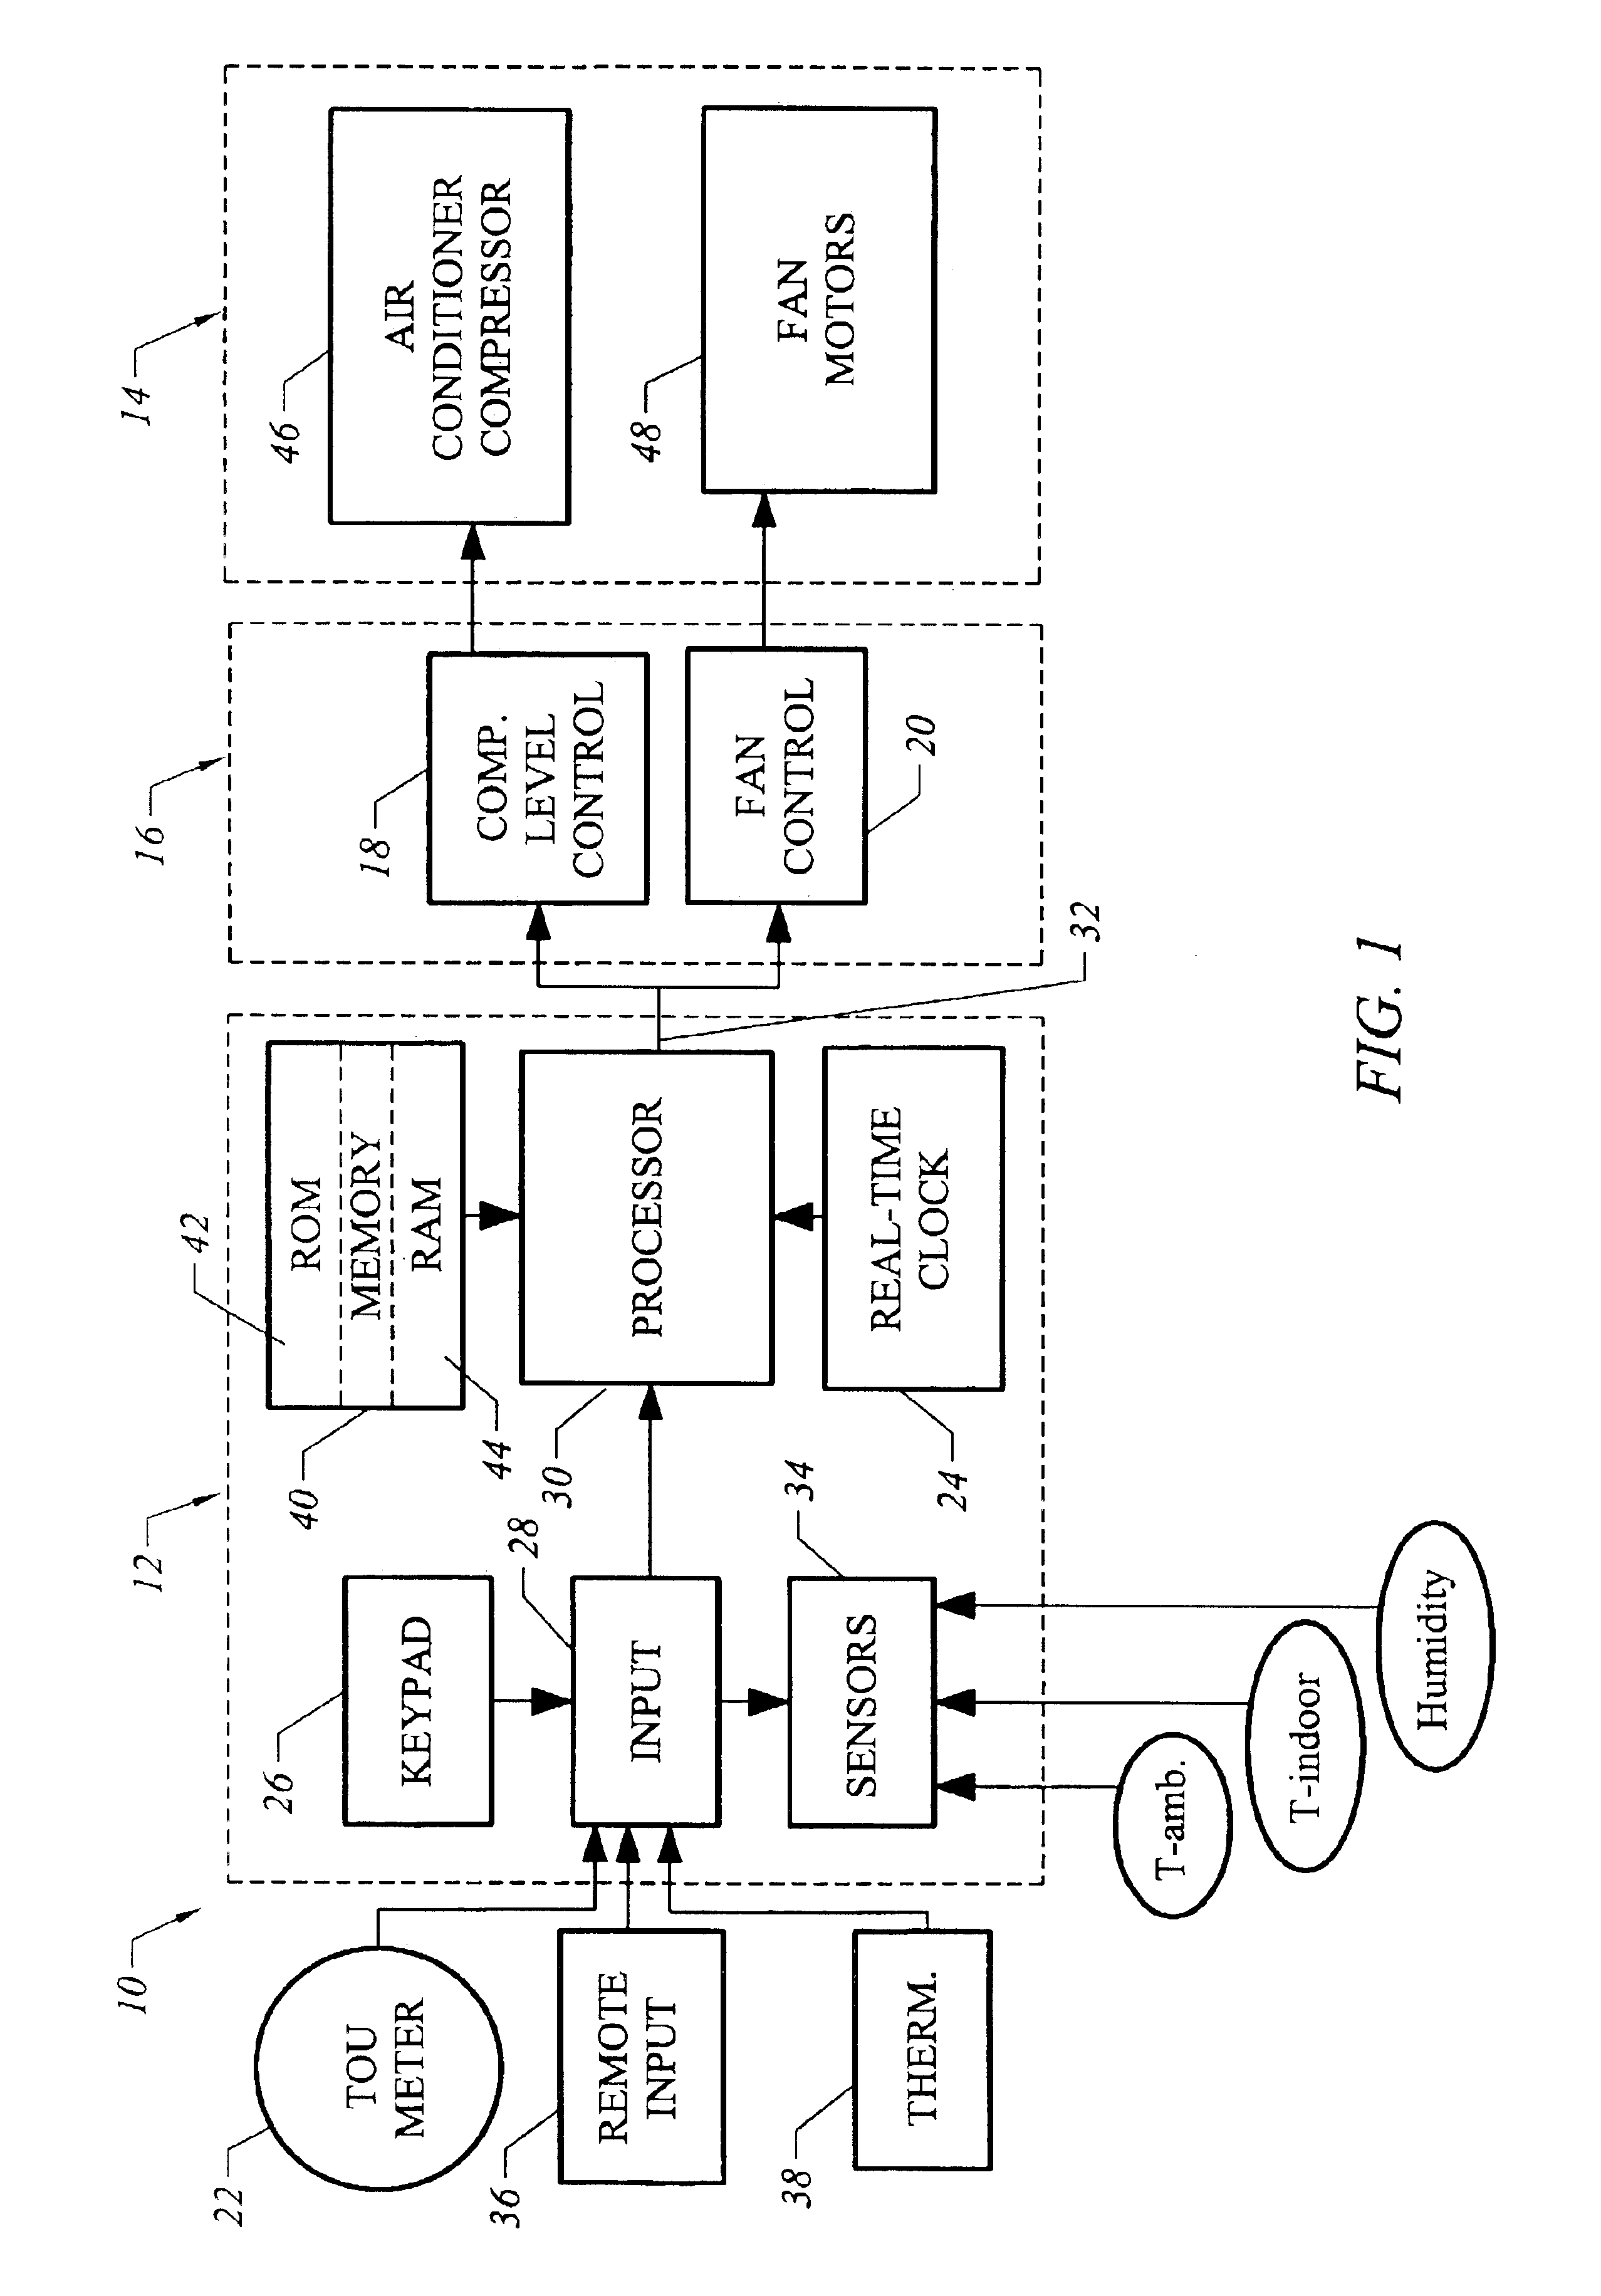 Strategic-response control system for regulating air conditioners for economic operation